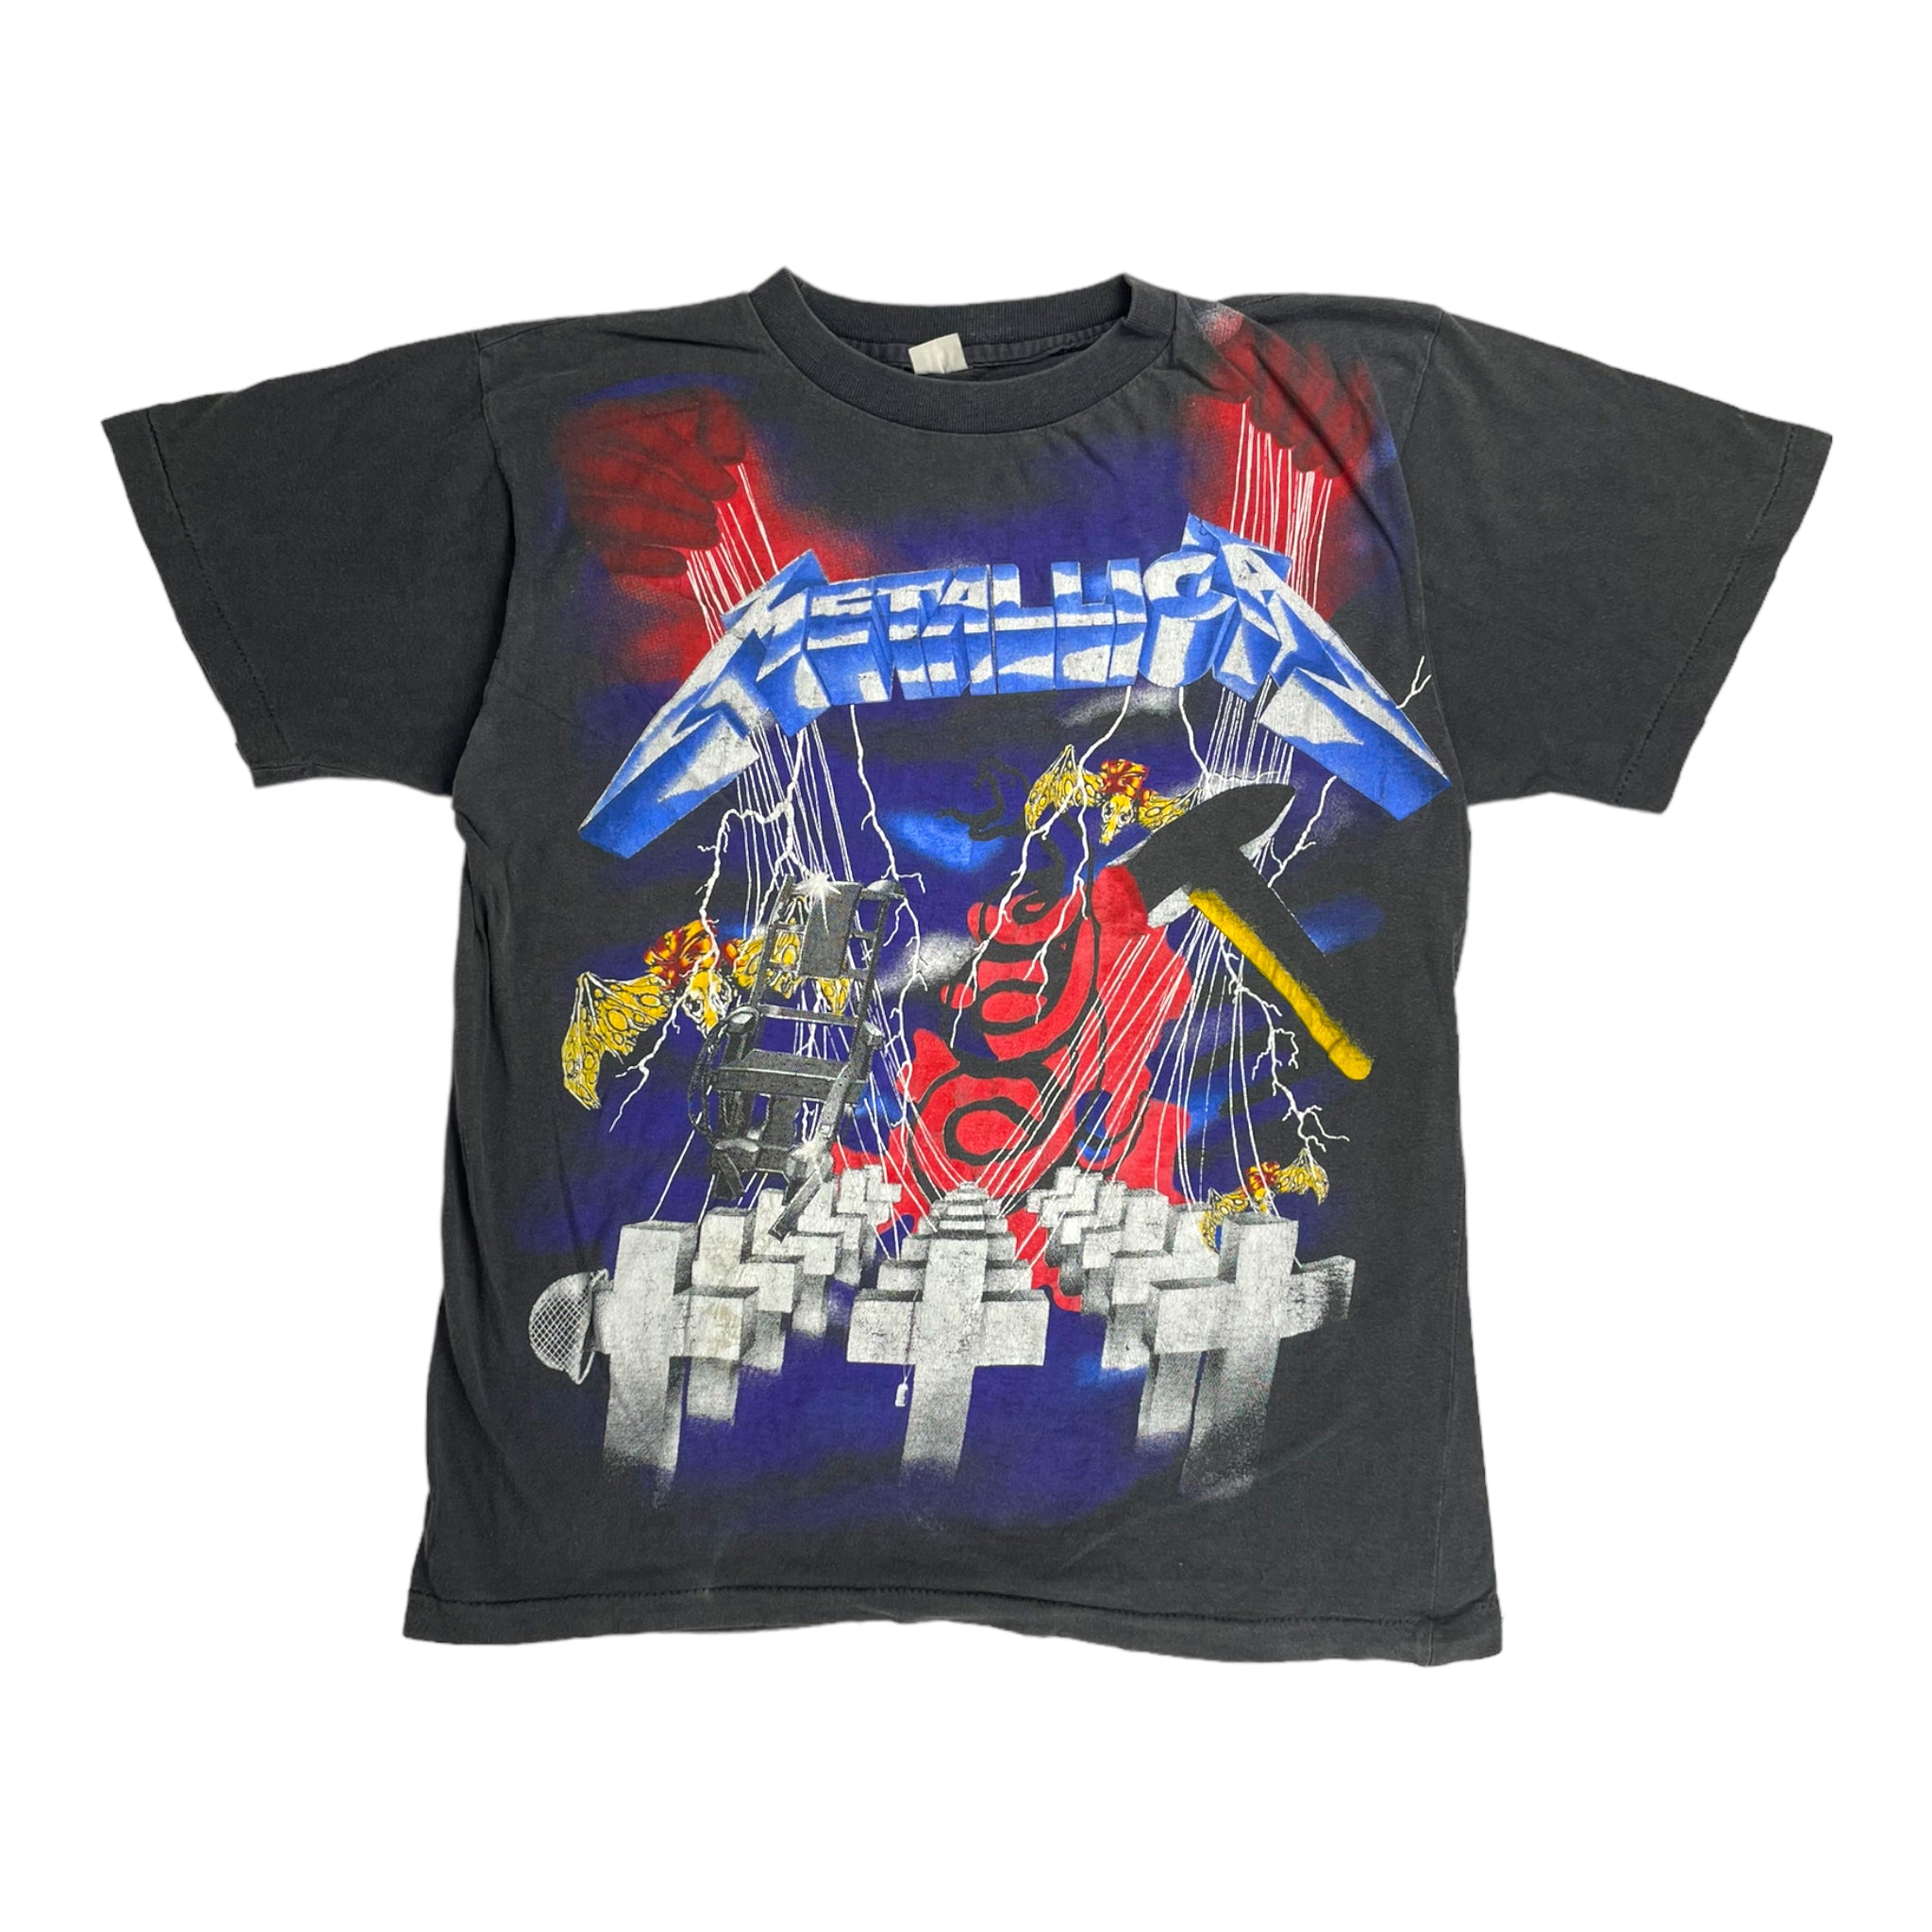 Vintage 80s Master of Puppets T-shirt